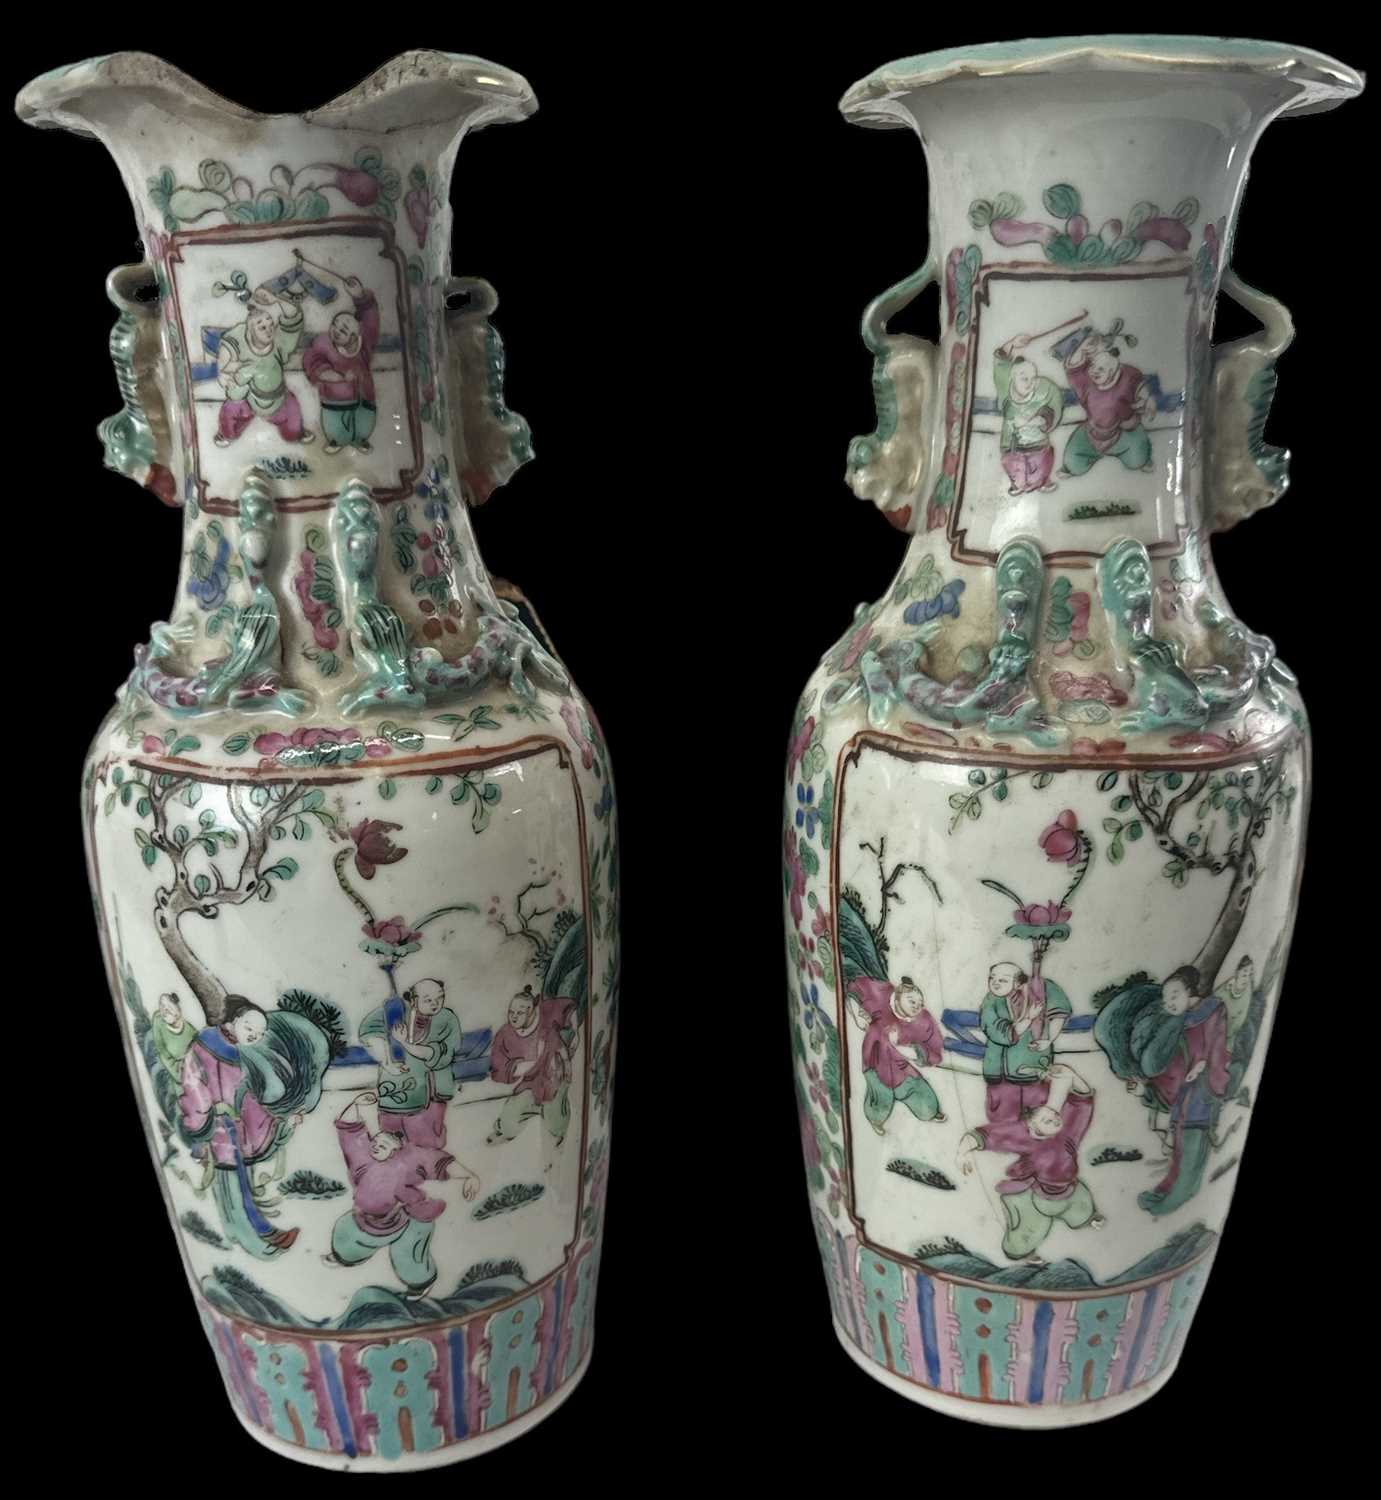 A pair of 19th century Chinese Canton Famille Rose porcelain hand painted vases decorated with